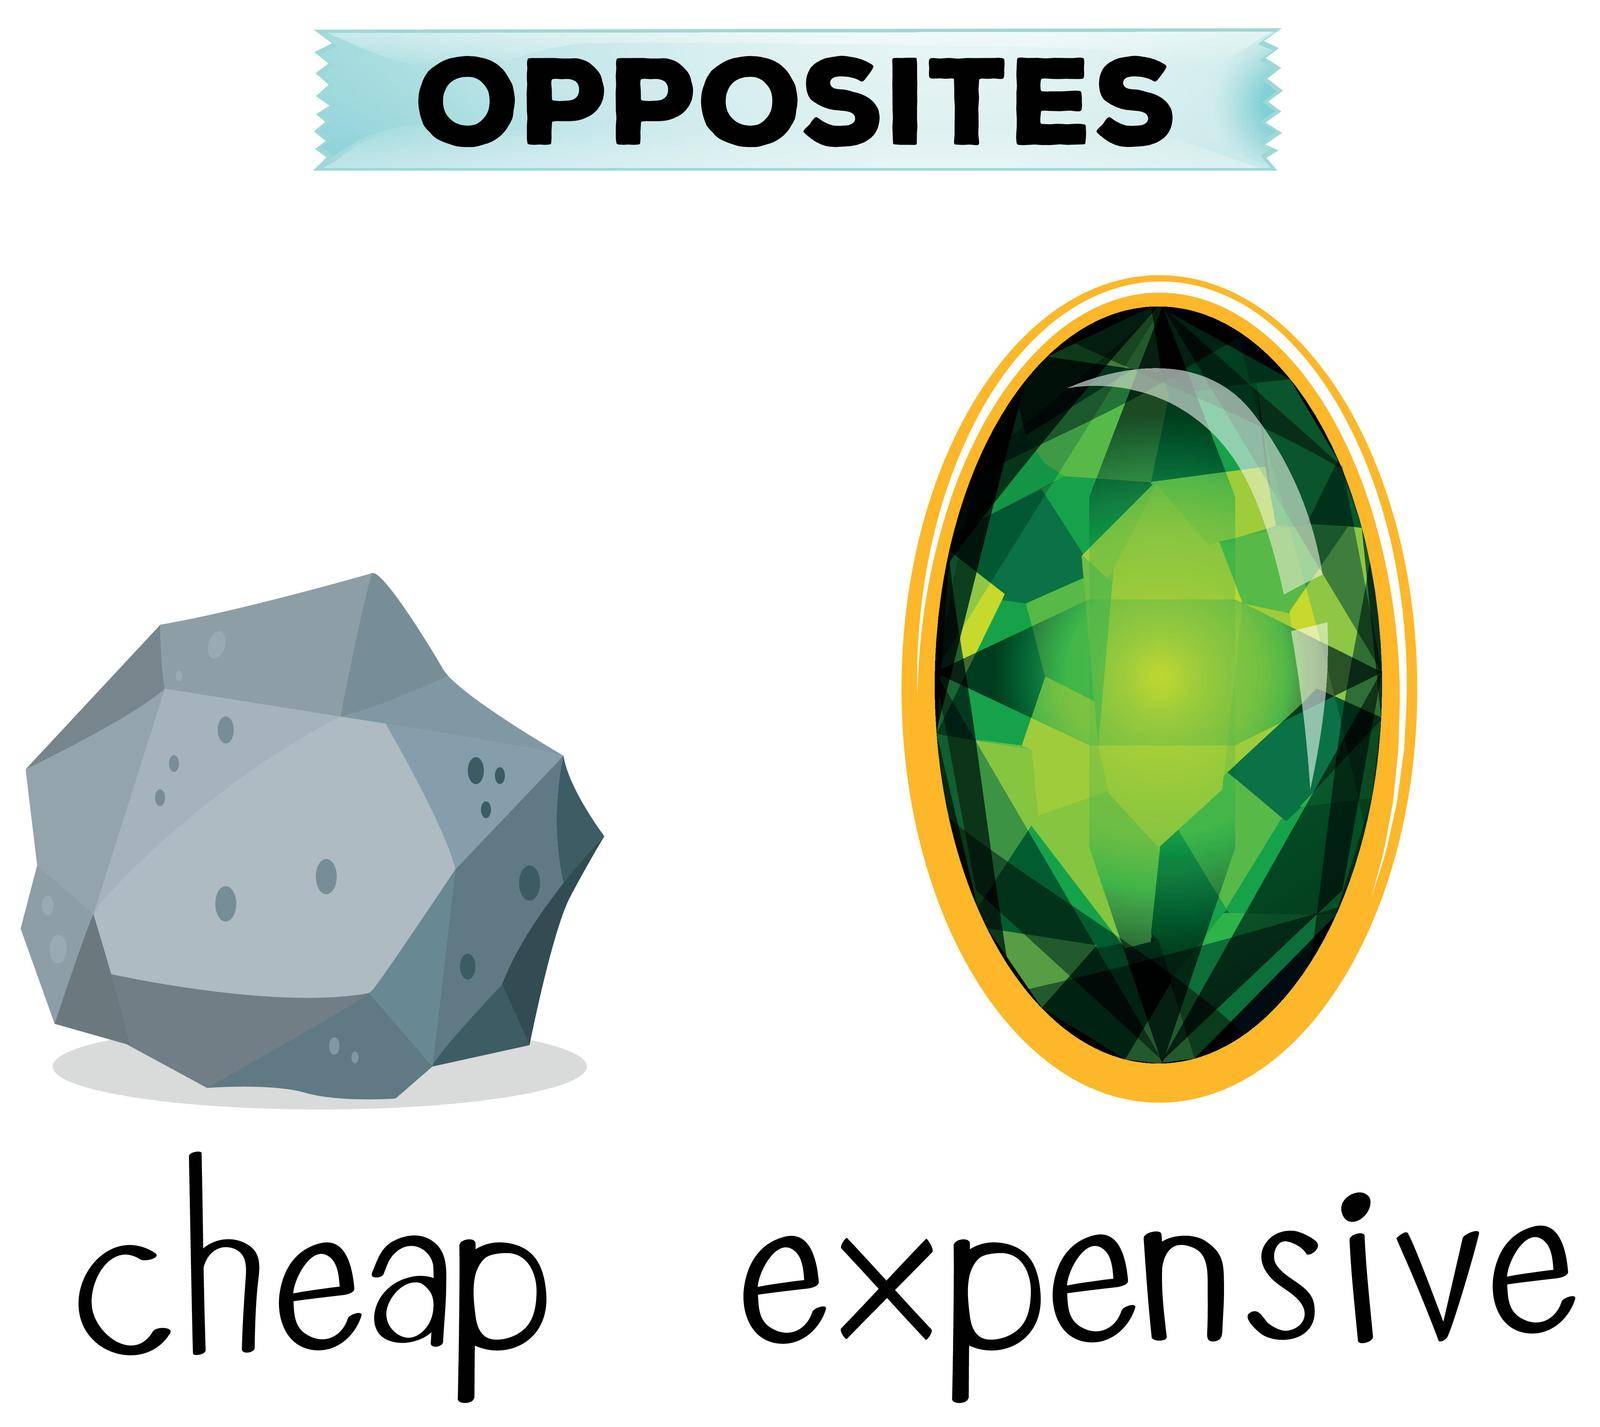 Opposite words for cheap and expensive by iimages